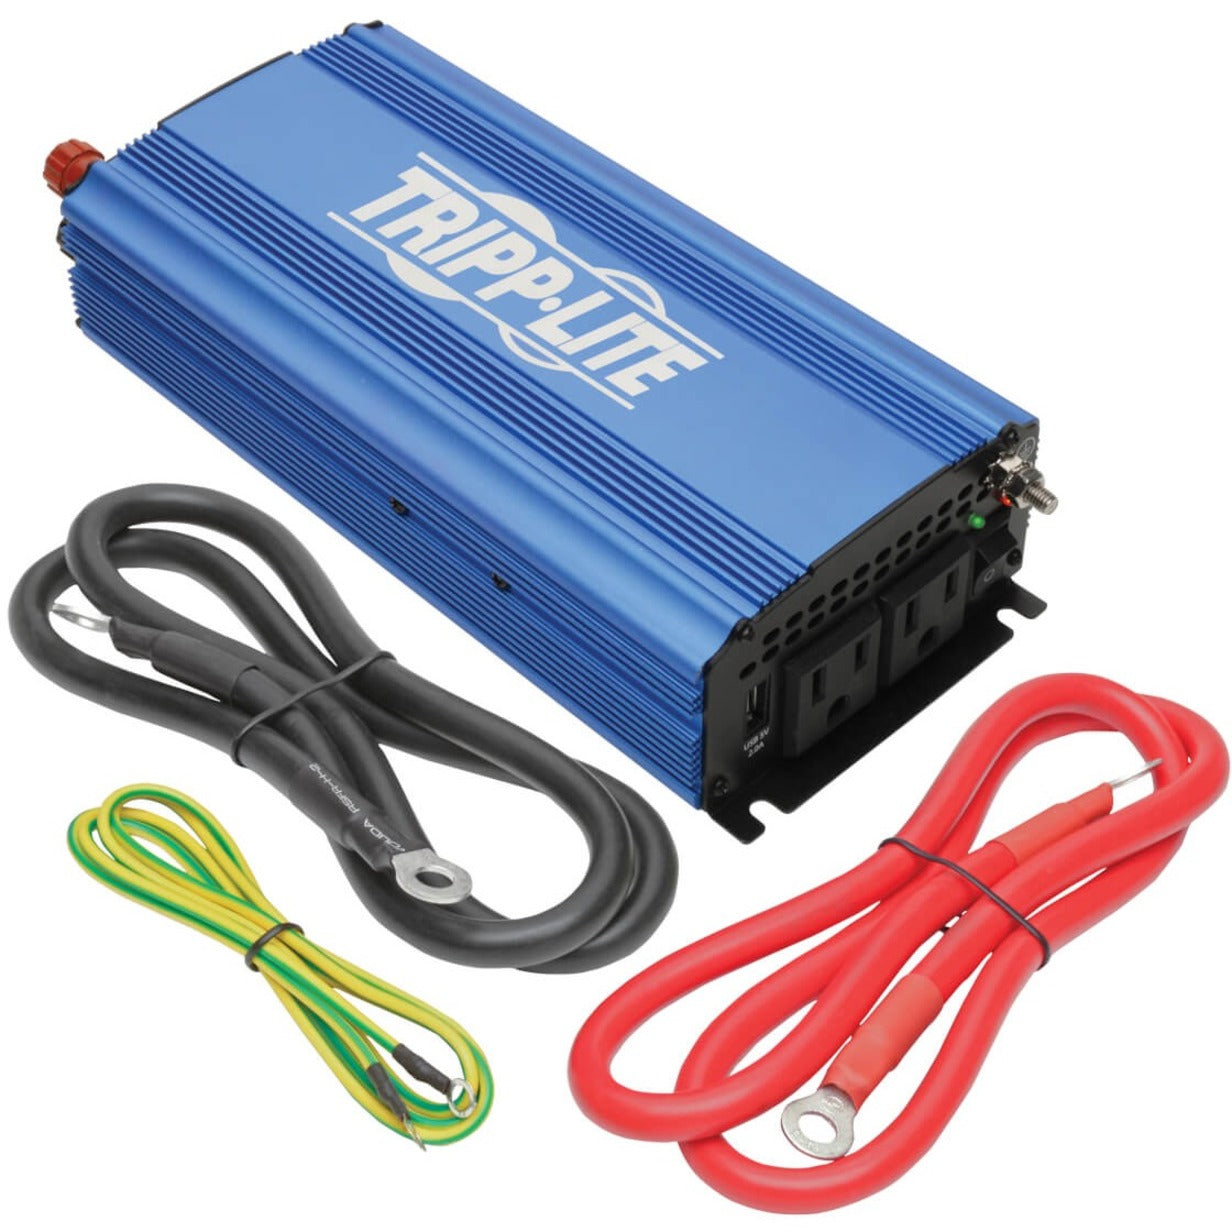 Tripp Lite PINV750 Power Inverter 750W Light-Duty Compact with 2 AC/1 USB - 2.0A/Battery Cables